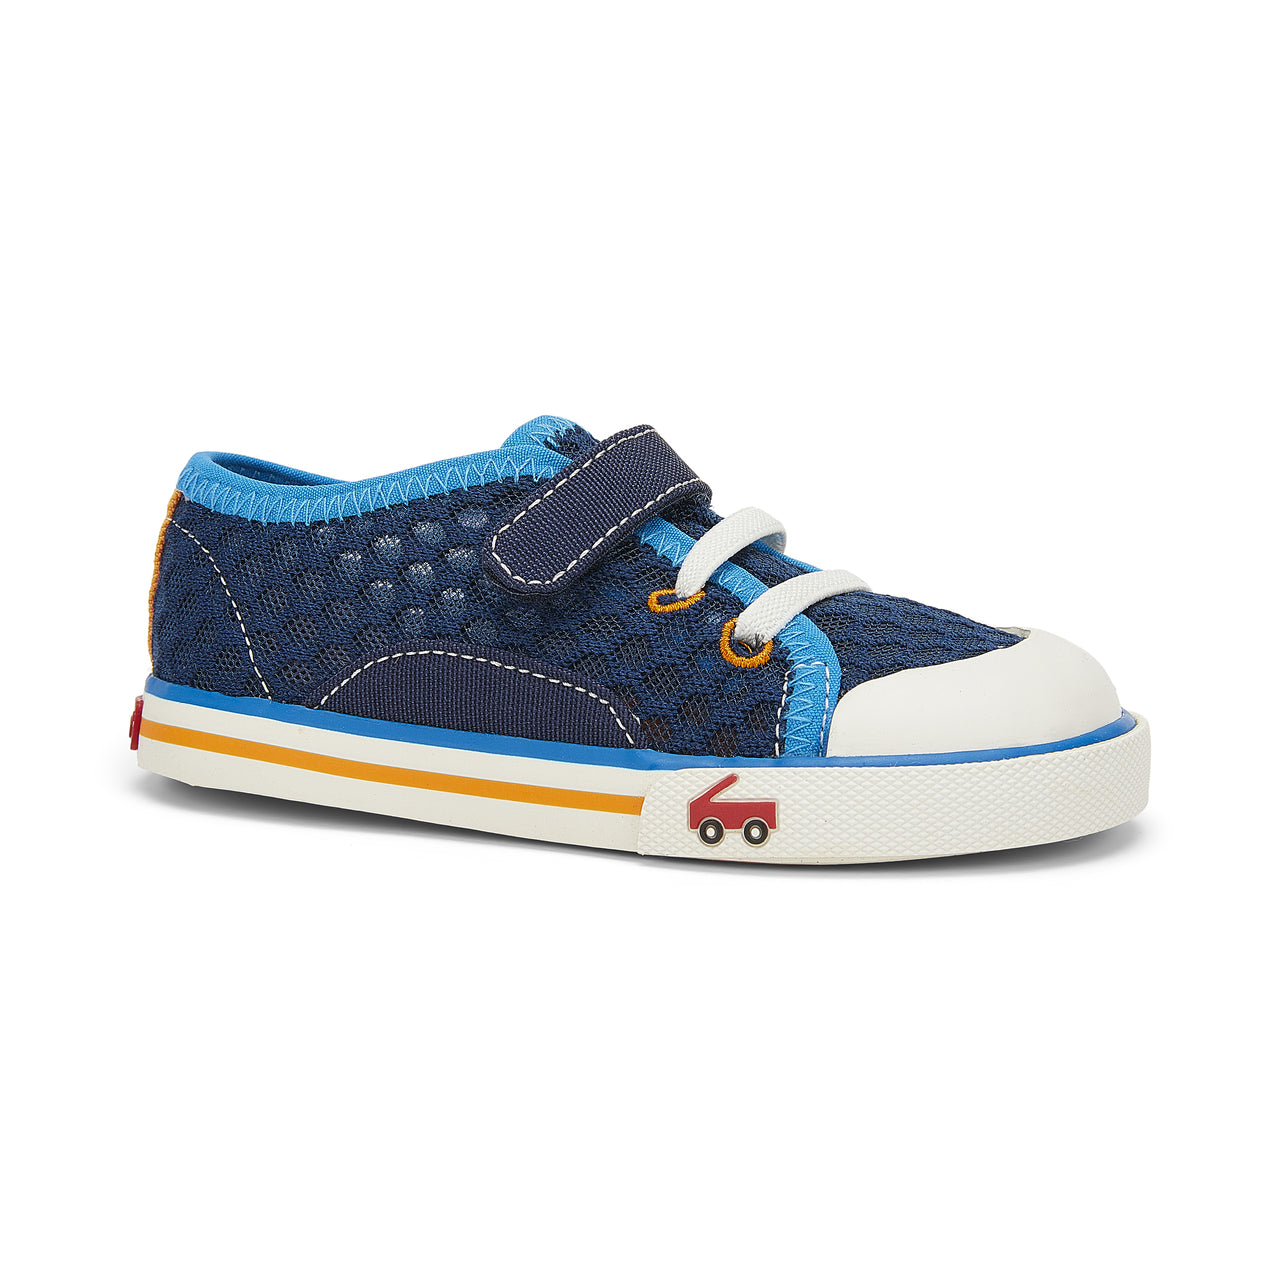 Classic sneaker styling meets water-friendly mesh in this lightweight shoe designed for summer fun. The hook-and-loop strap and elastic laces stay secure and full coverage ensures rocks and debris stay out.